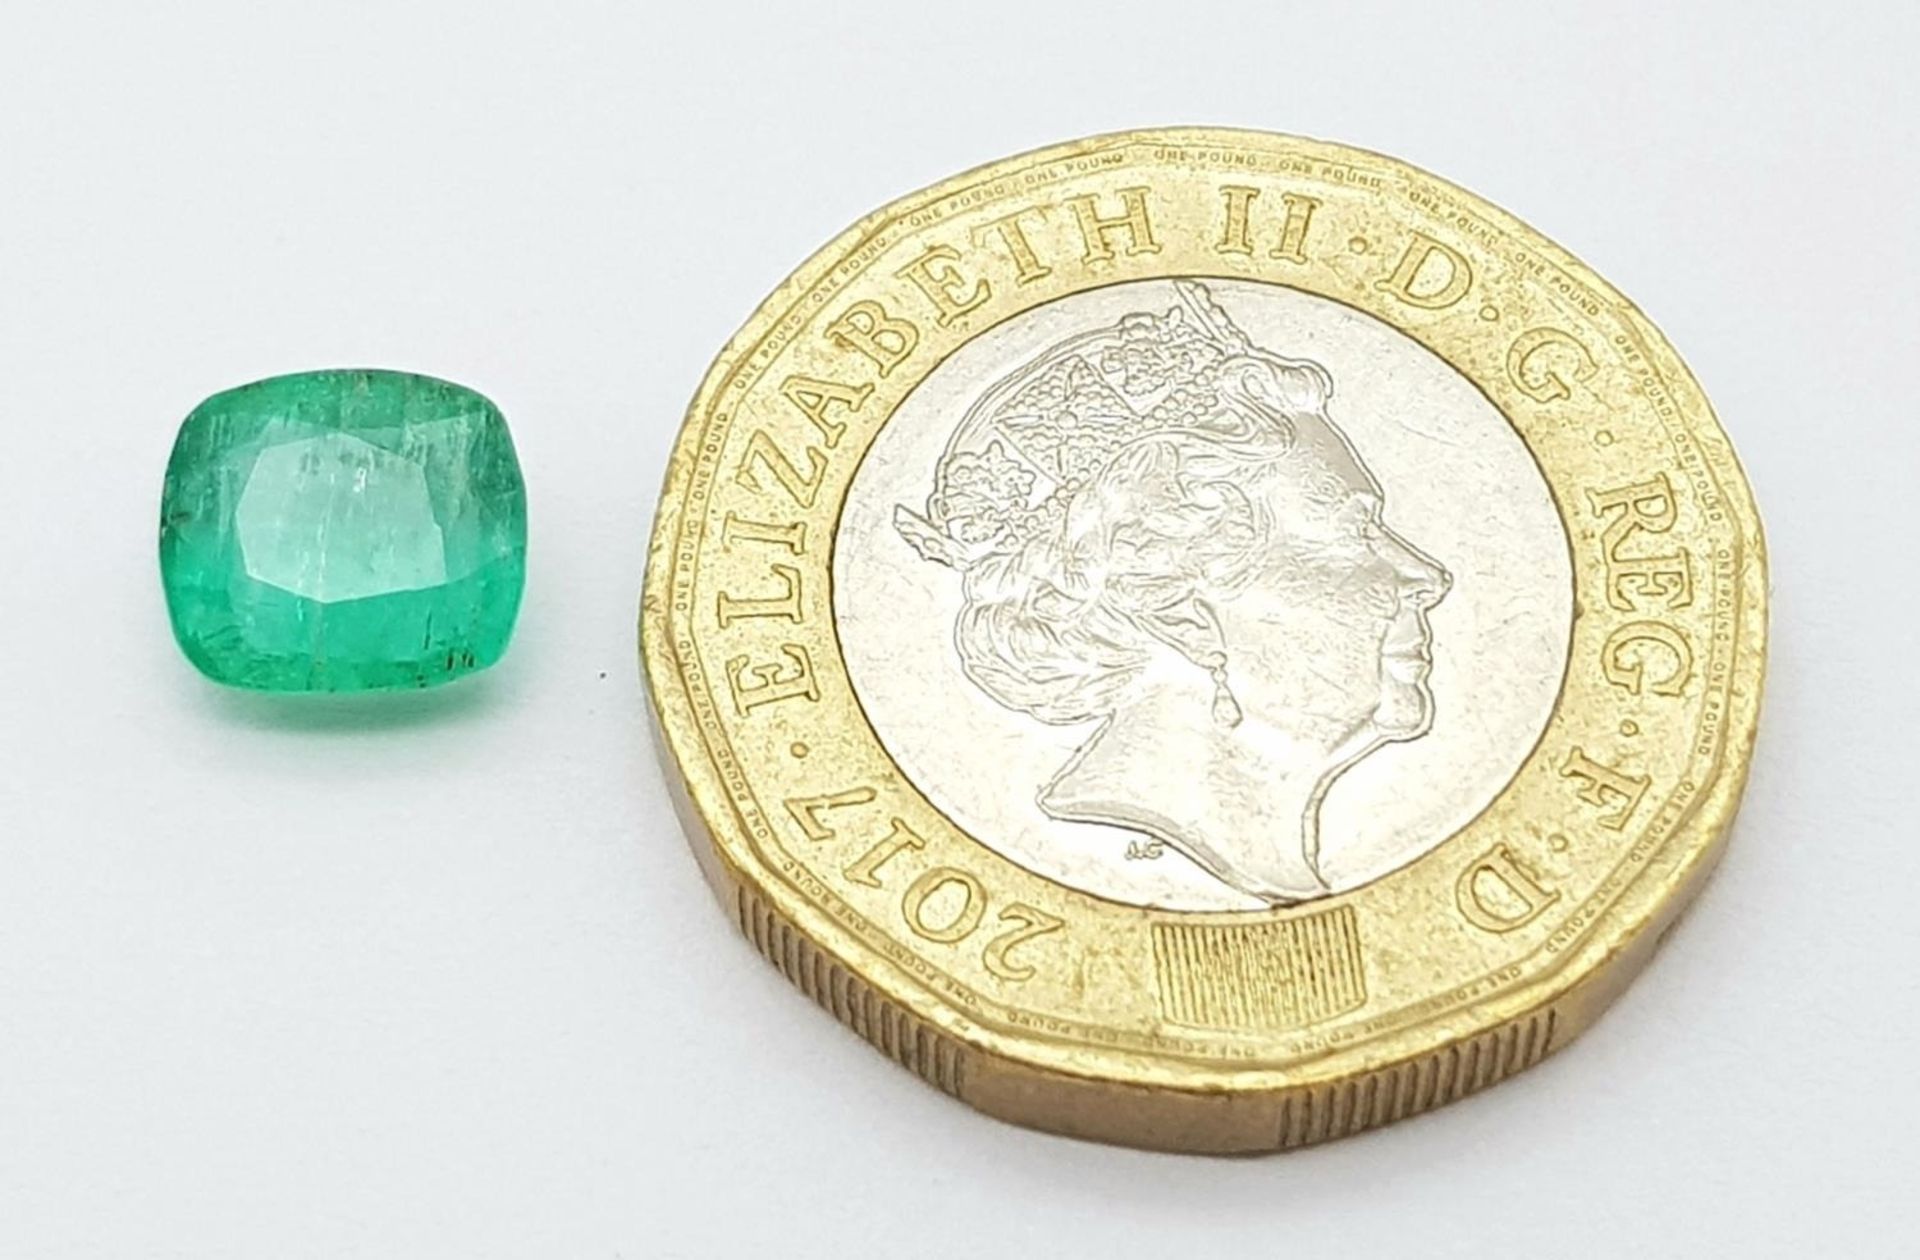 A 1.56ct Afghanistan Panjsher Mines Rare Emerald - GFCO Swiss Certified. - Image 4 of 5